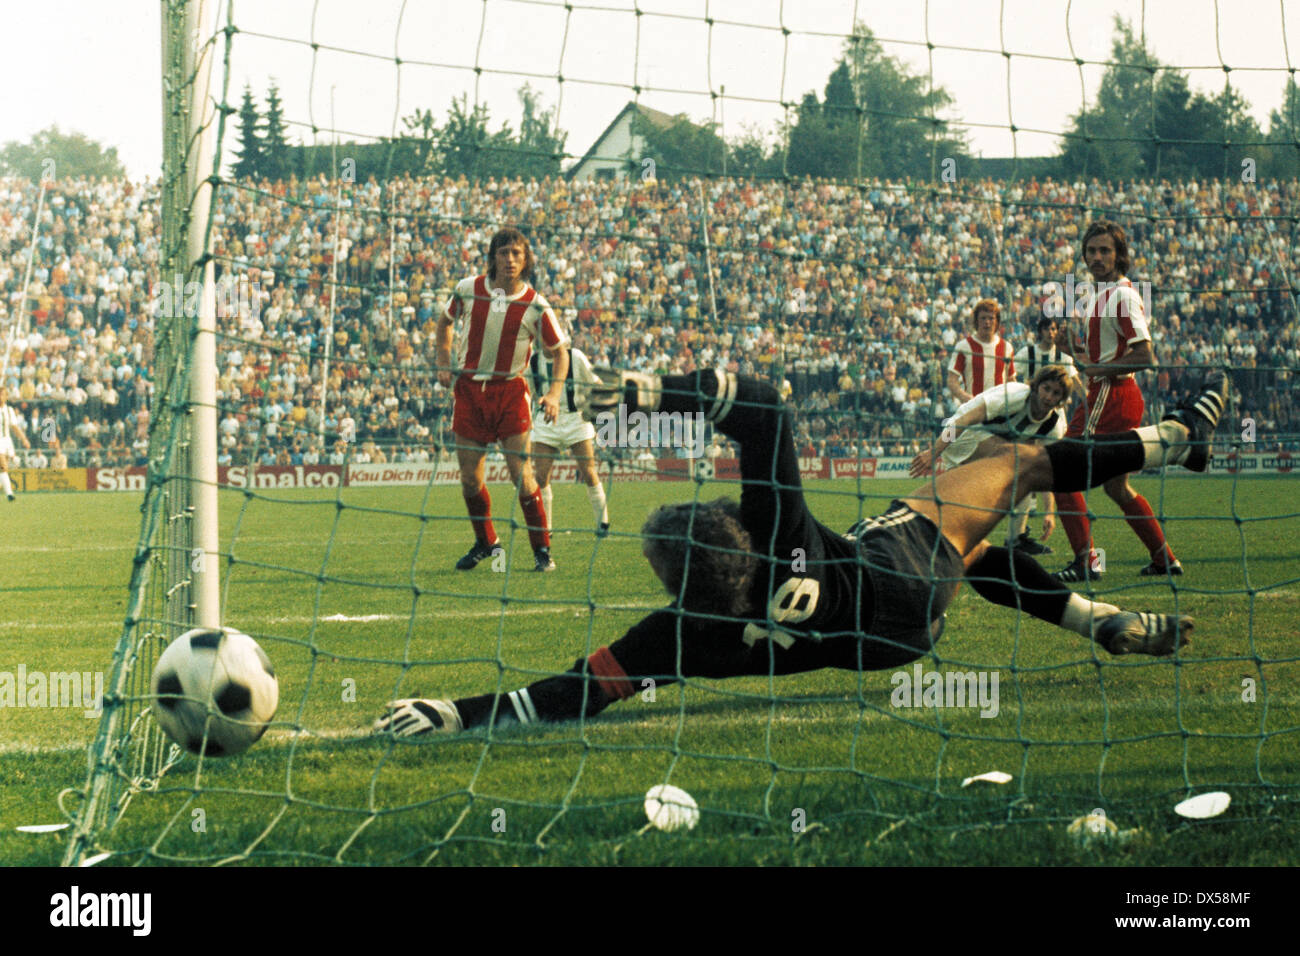 Football, Bundesliga, 1973/1974, le stade am Boekelberg, Borussia Moenchengladbach contre Fortuna Cologne 3:1, Horst Koeppel pour marquer un but 3:0, f.l.t.r. Karl-Heinz Struth (Cologne), keeper Wolfgang Fahrian (Cologne), Noel Campbell (Cologne), SCOR objectif Banque D'Images